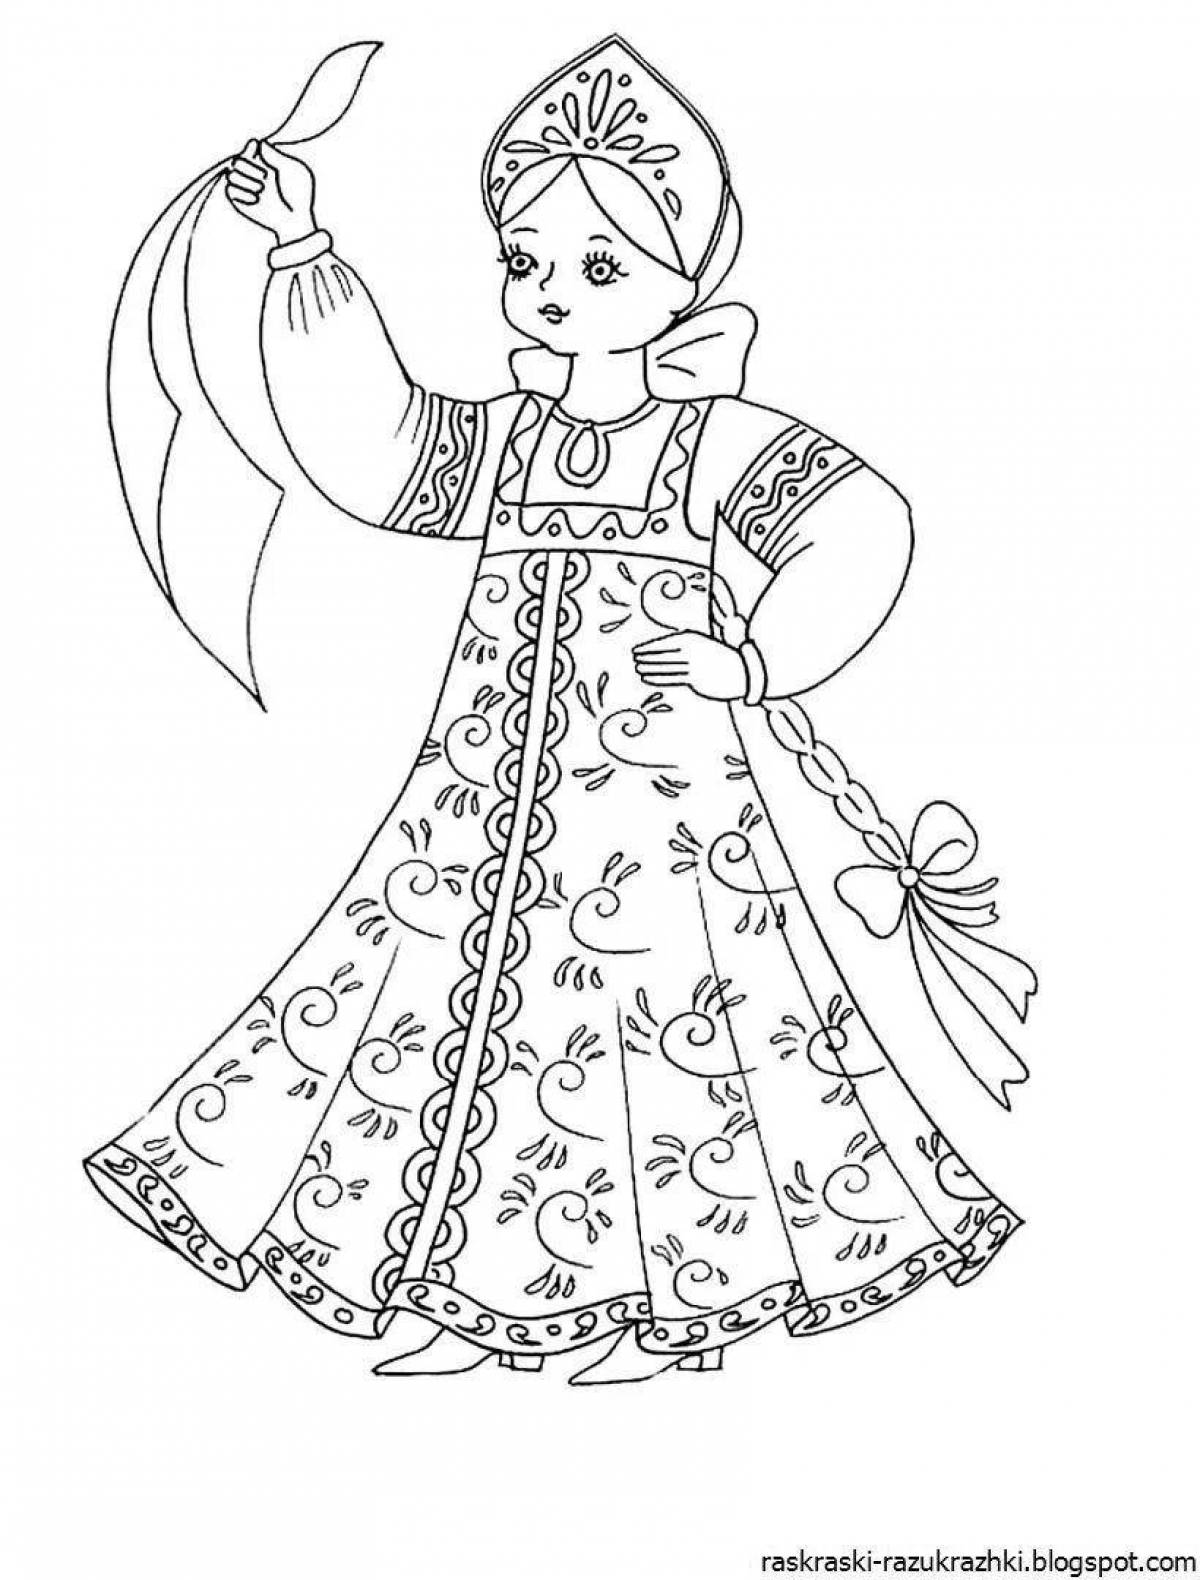 Coloring page exquisite Russian beauty